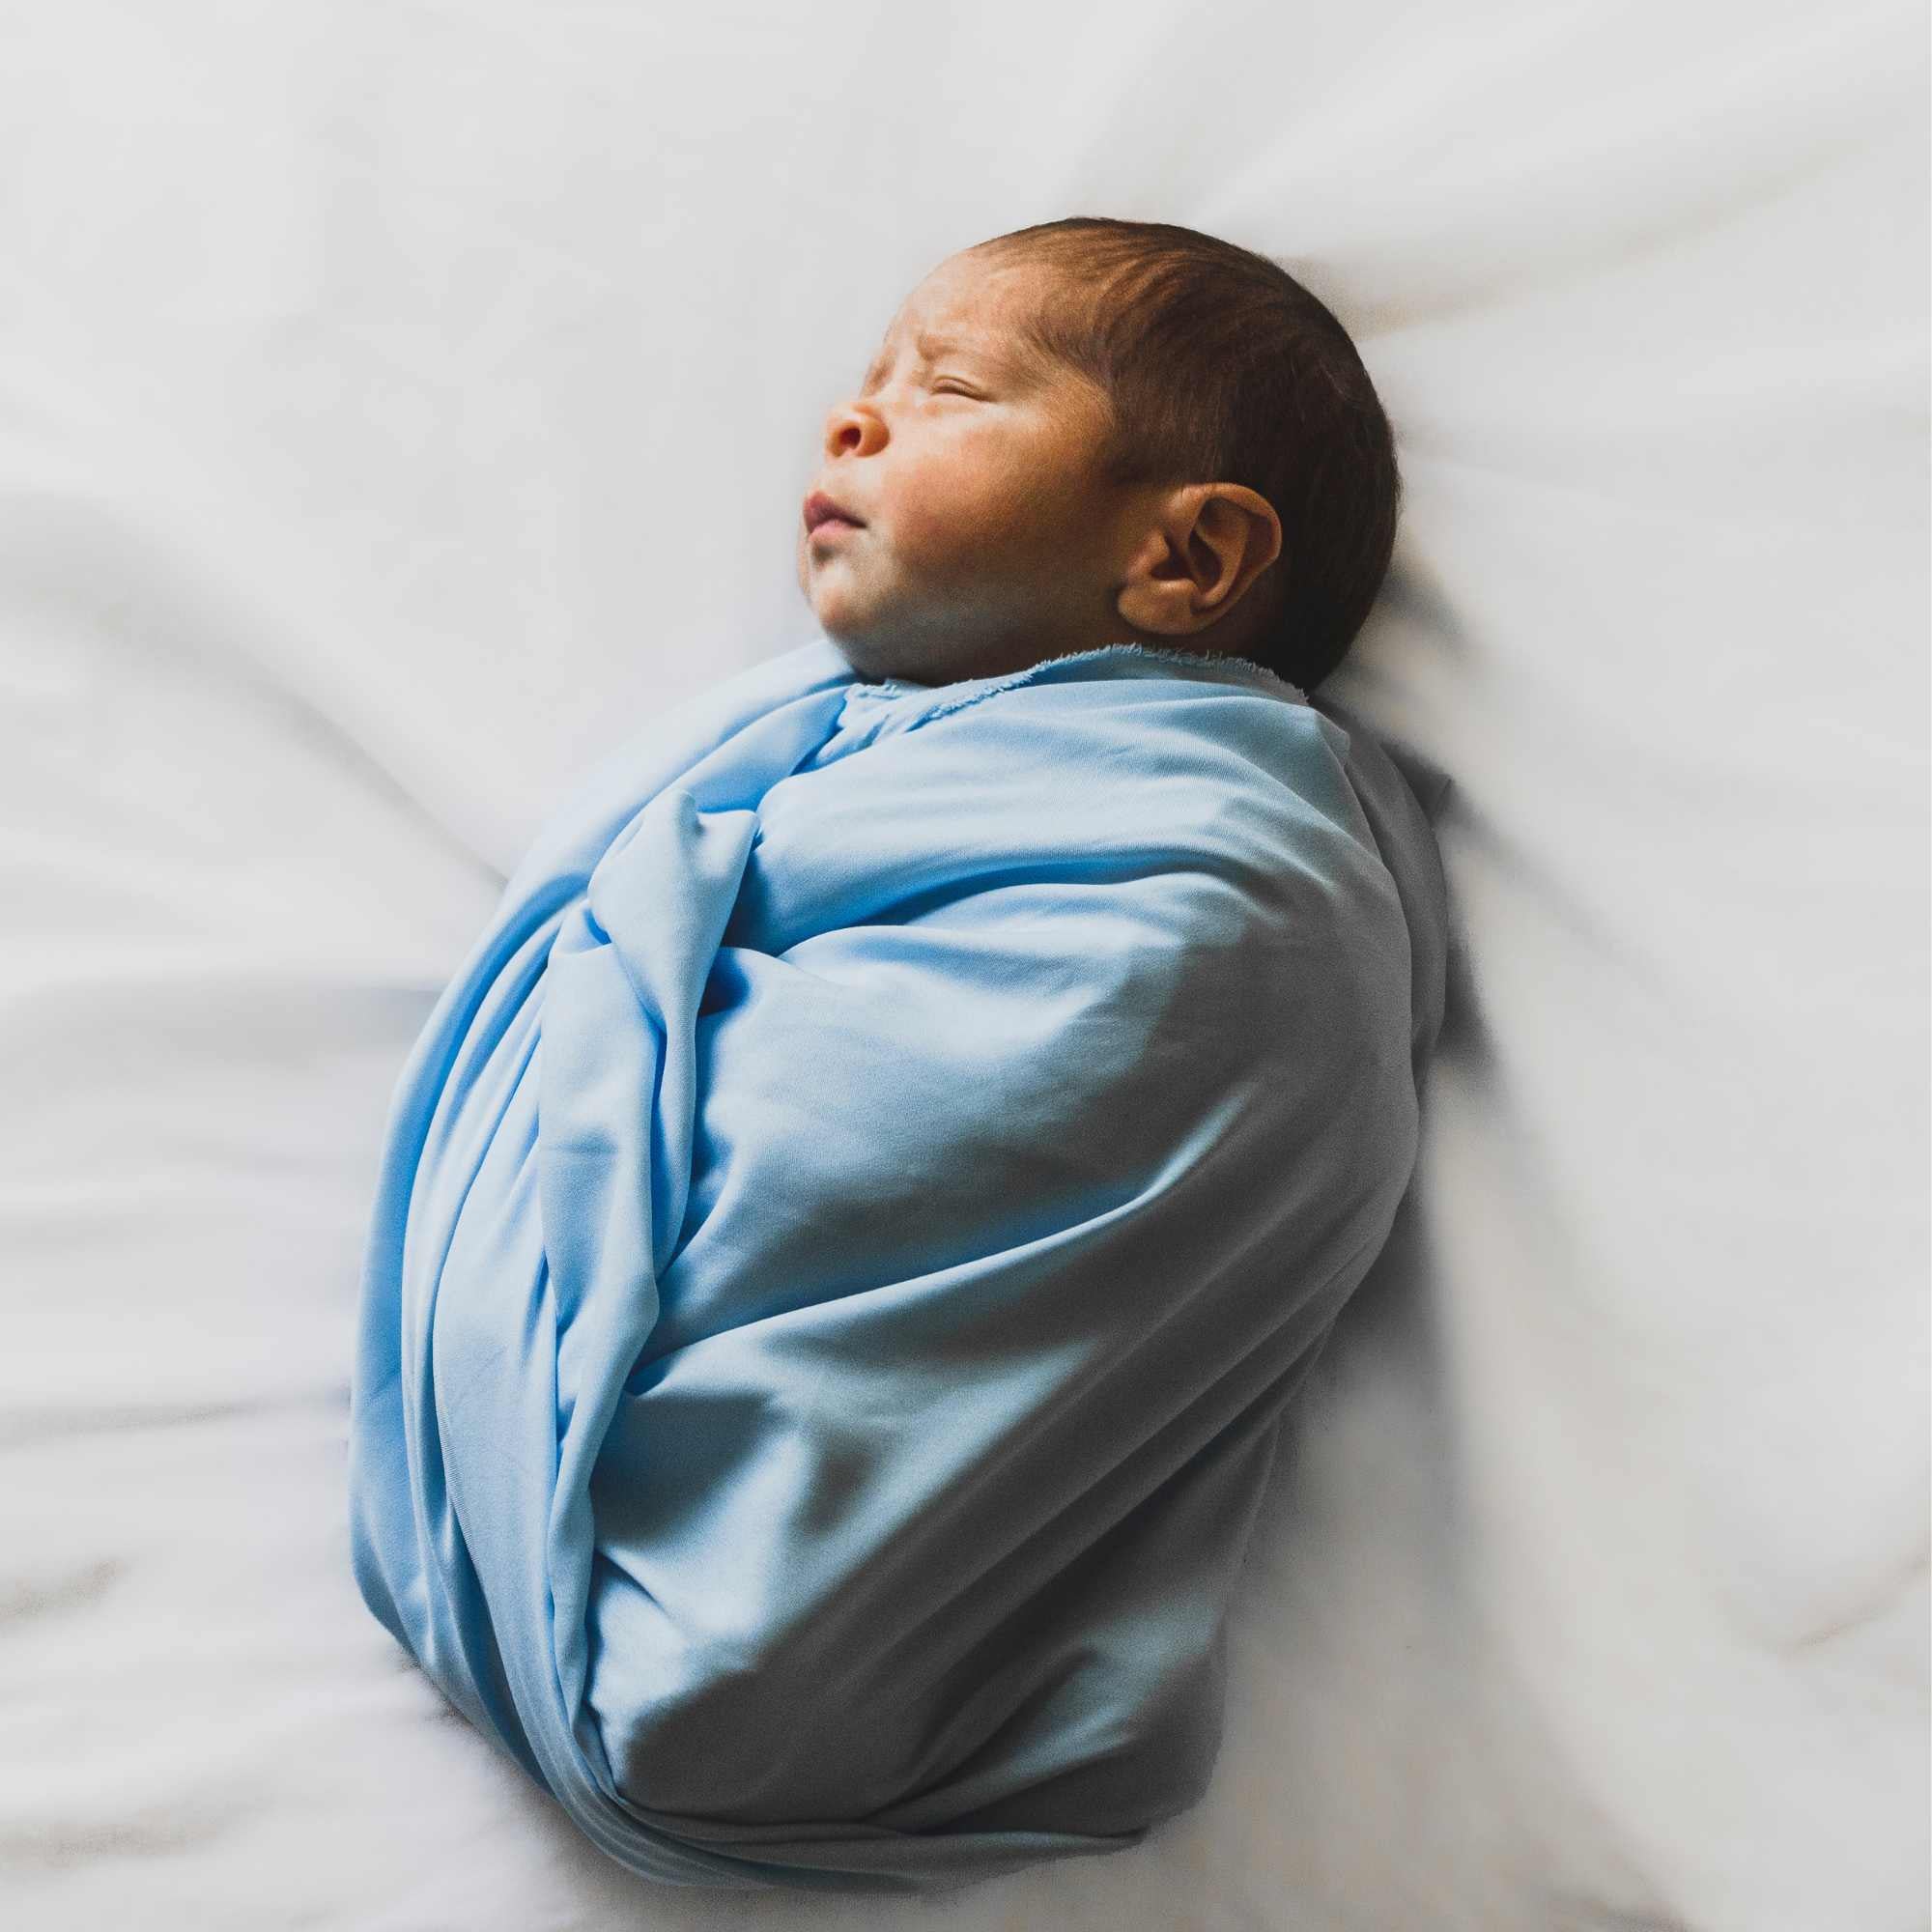 Baby Sleeping in a swaddle